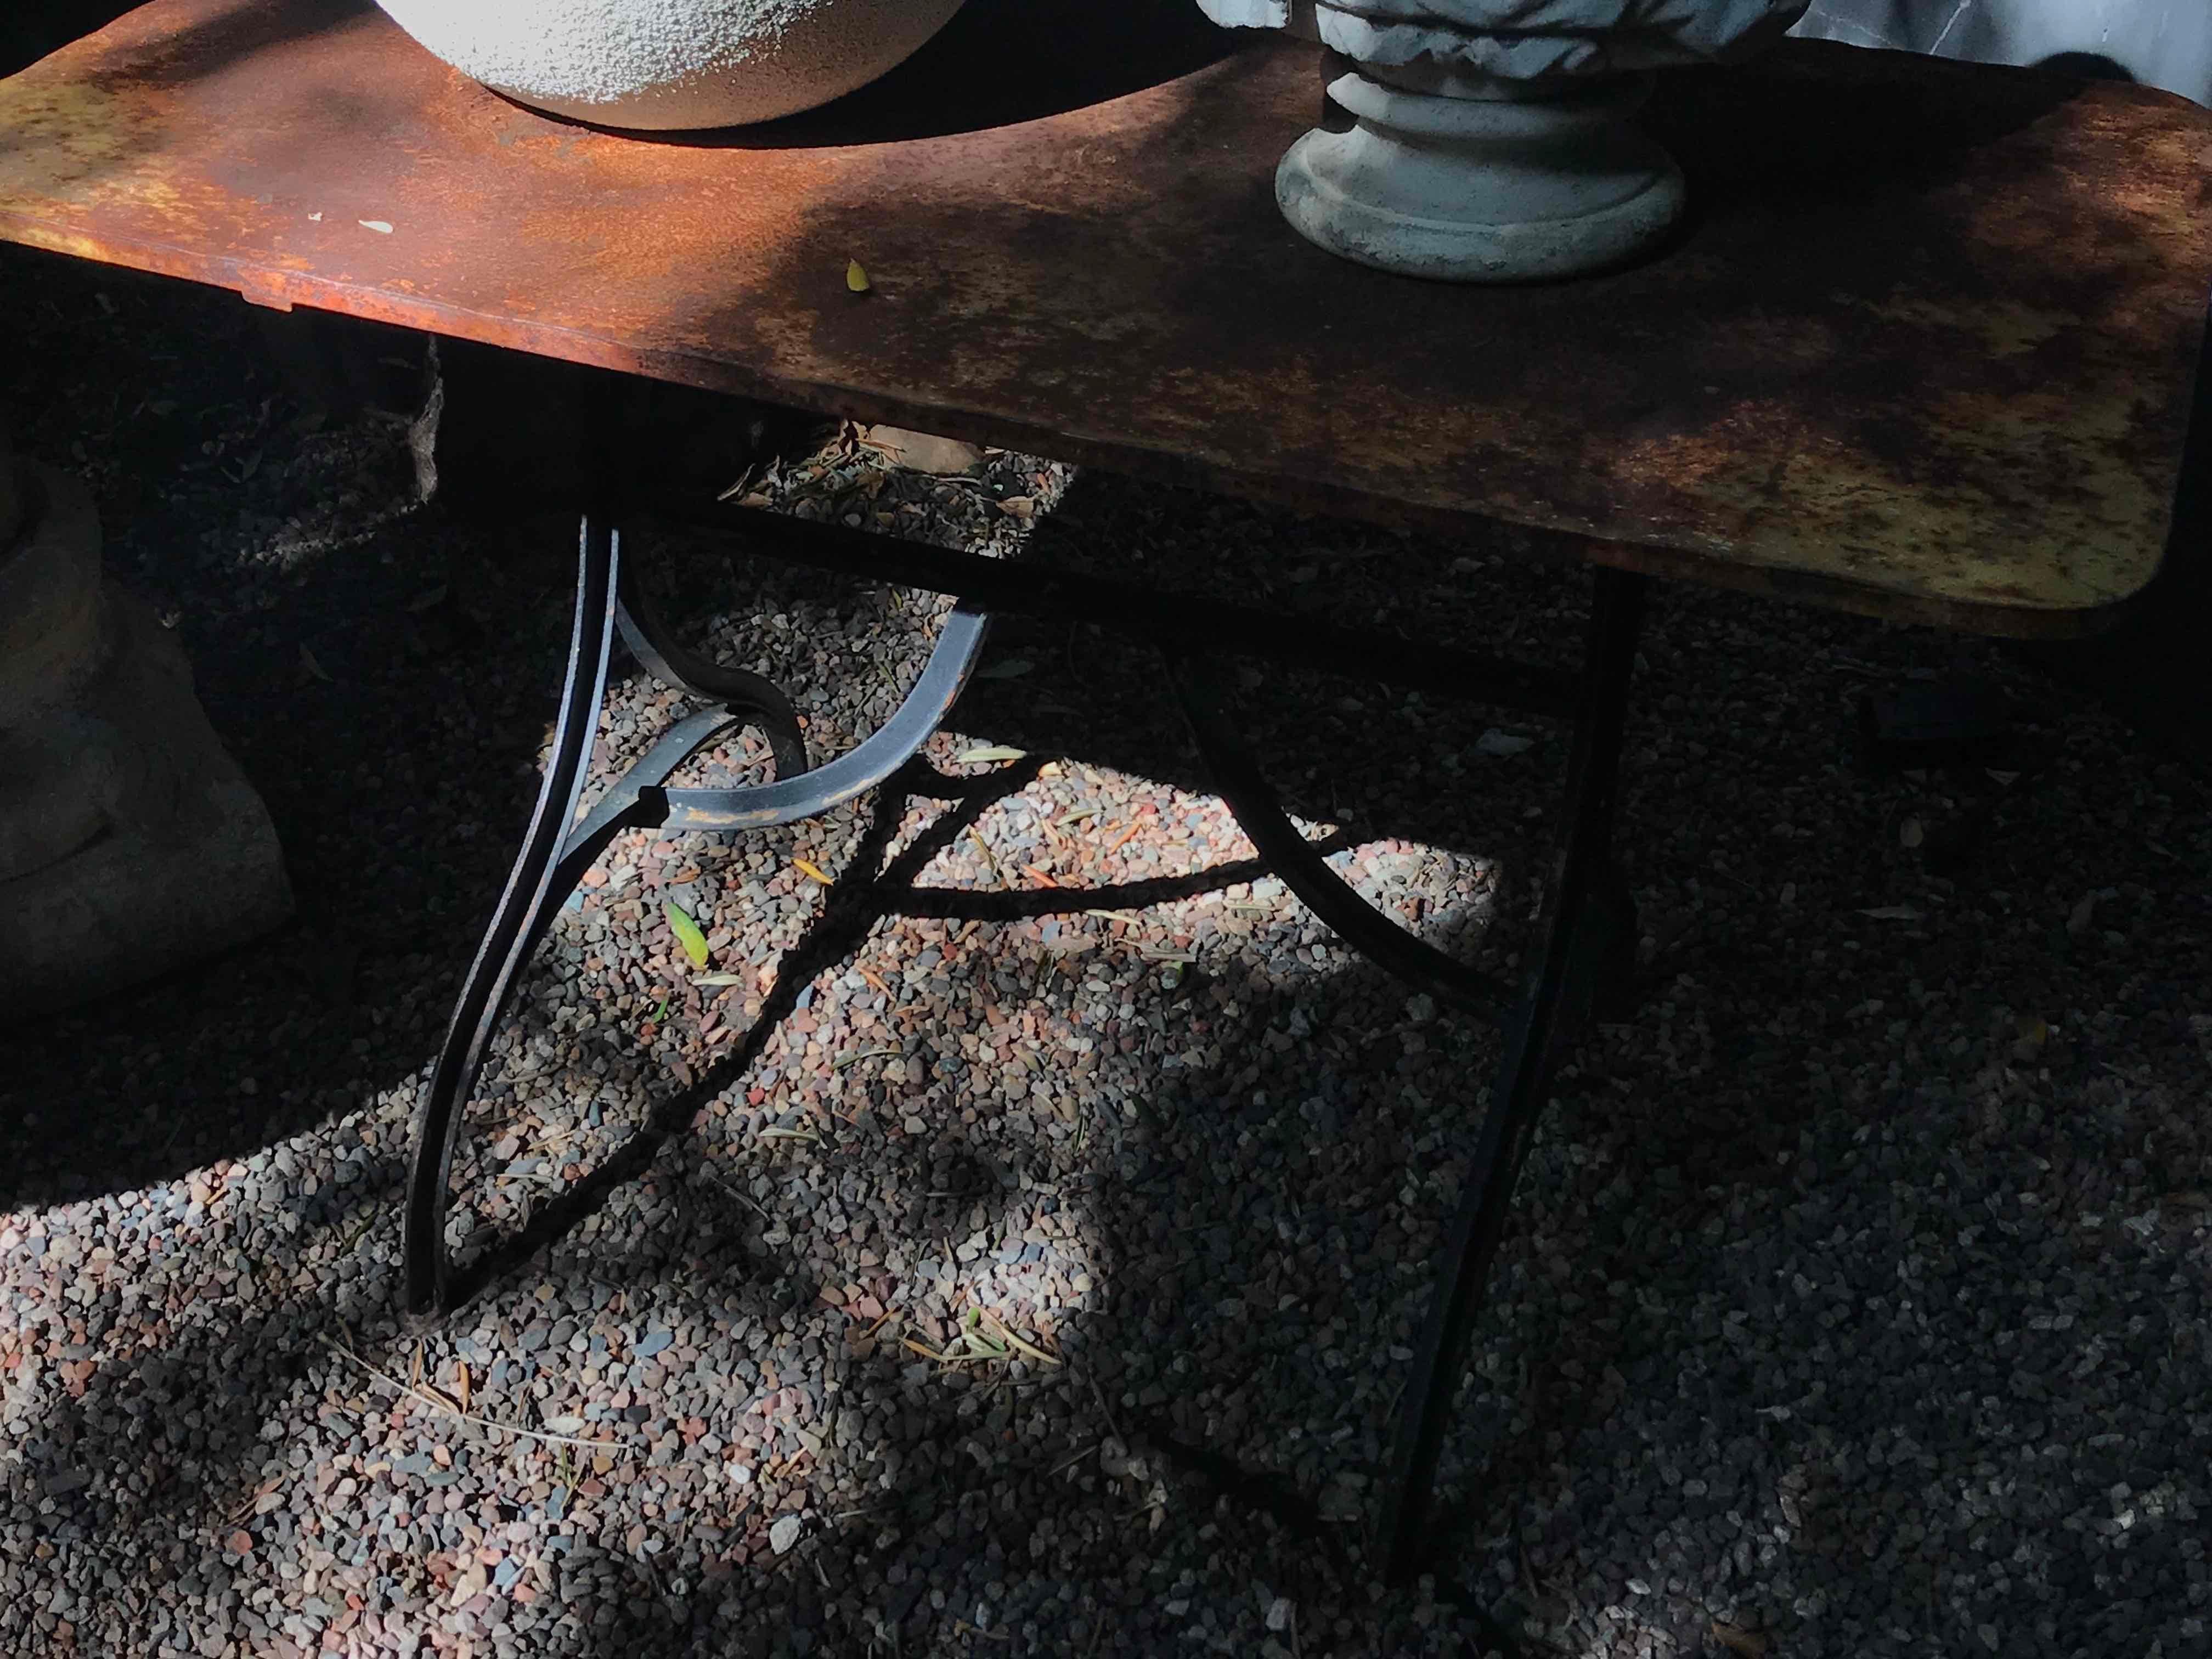 Late 19th century yellow garden table with natural patina on a iron trestle base from France.